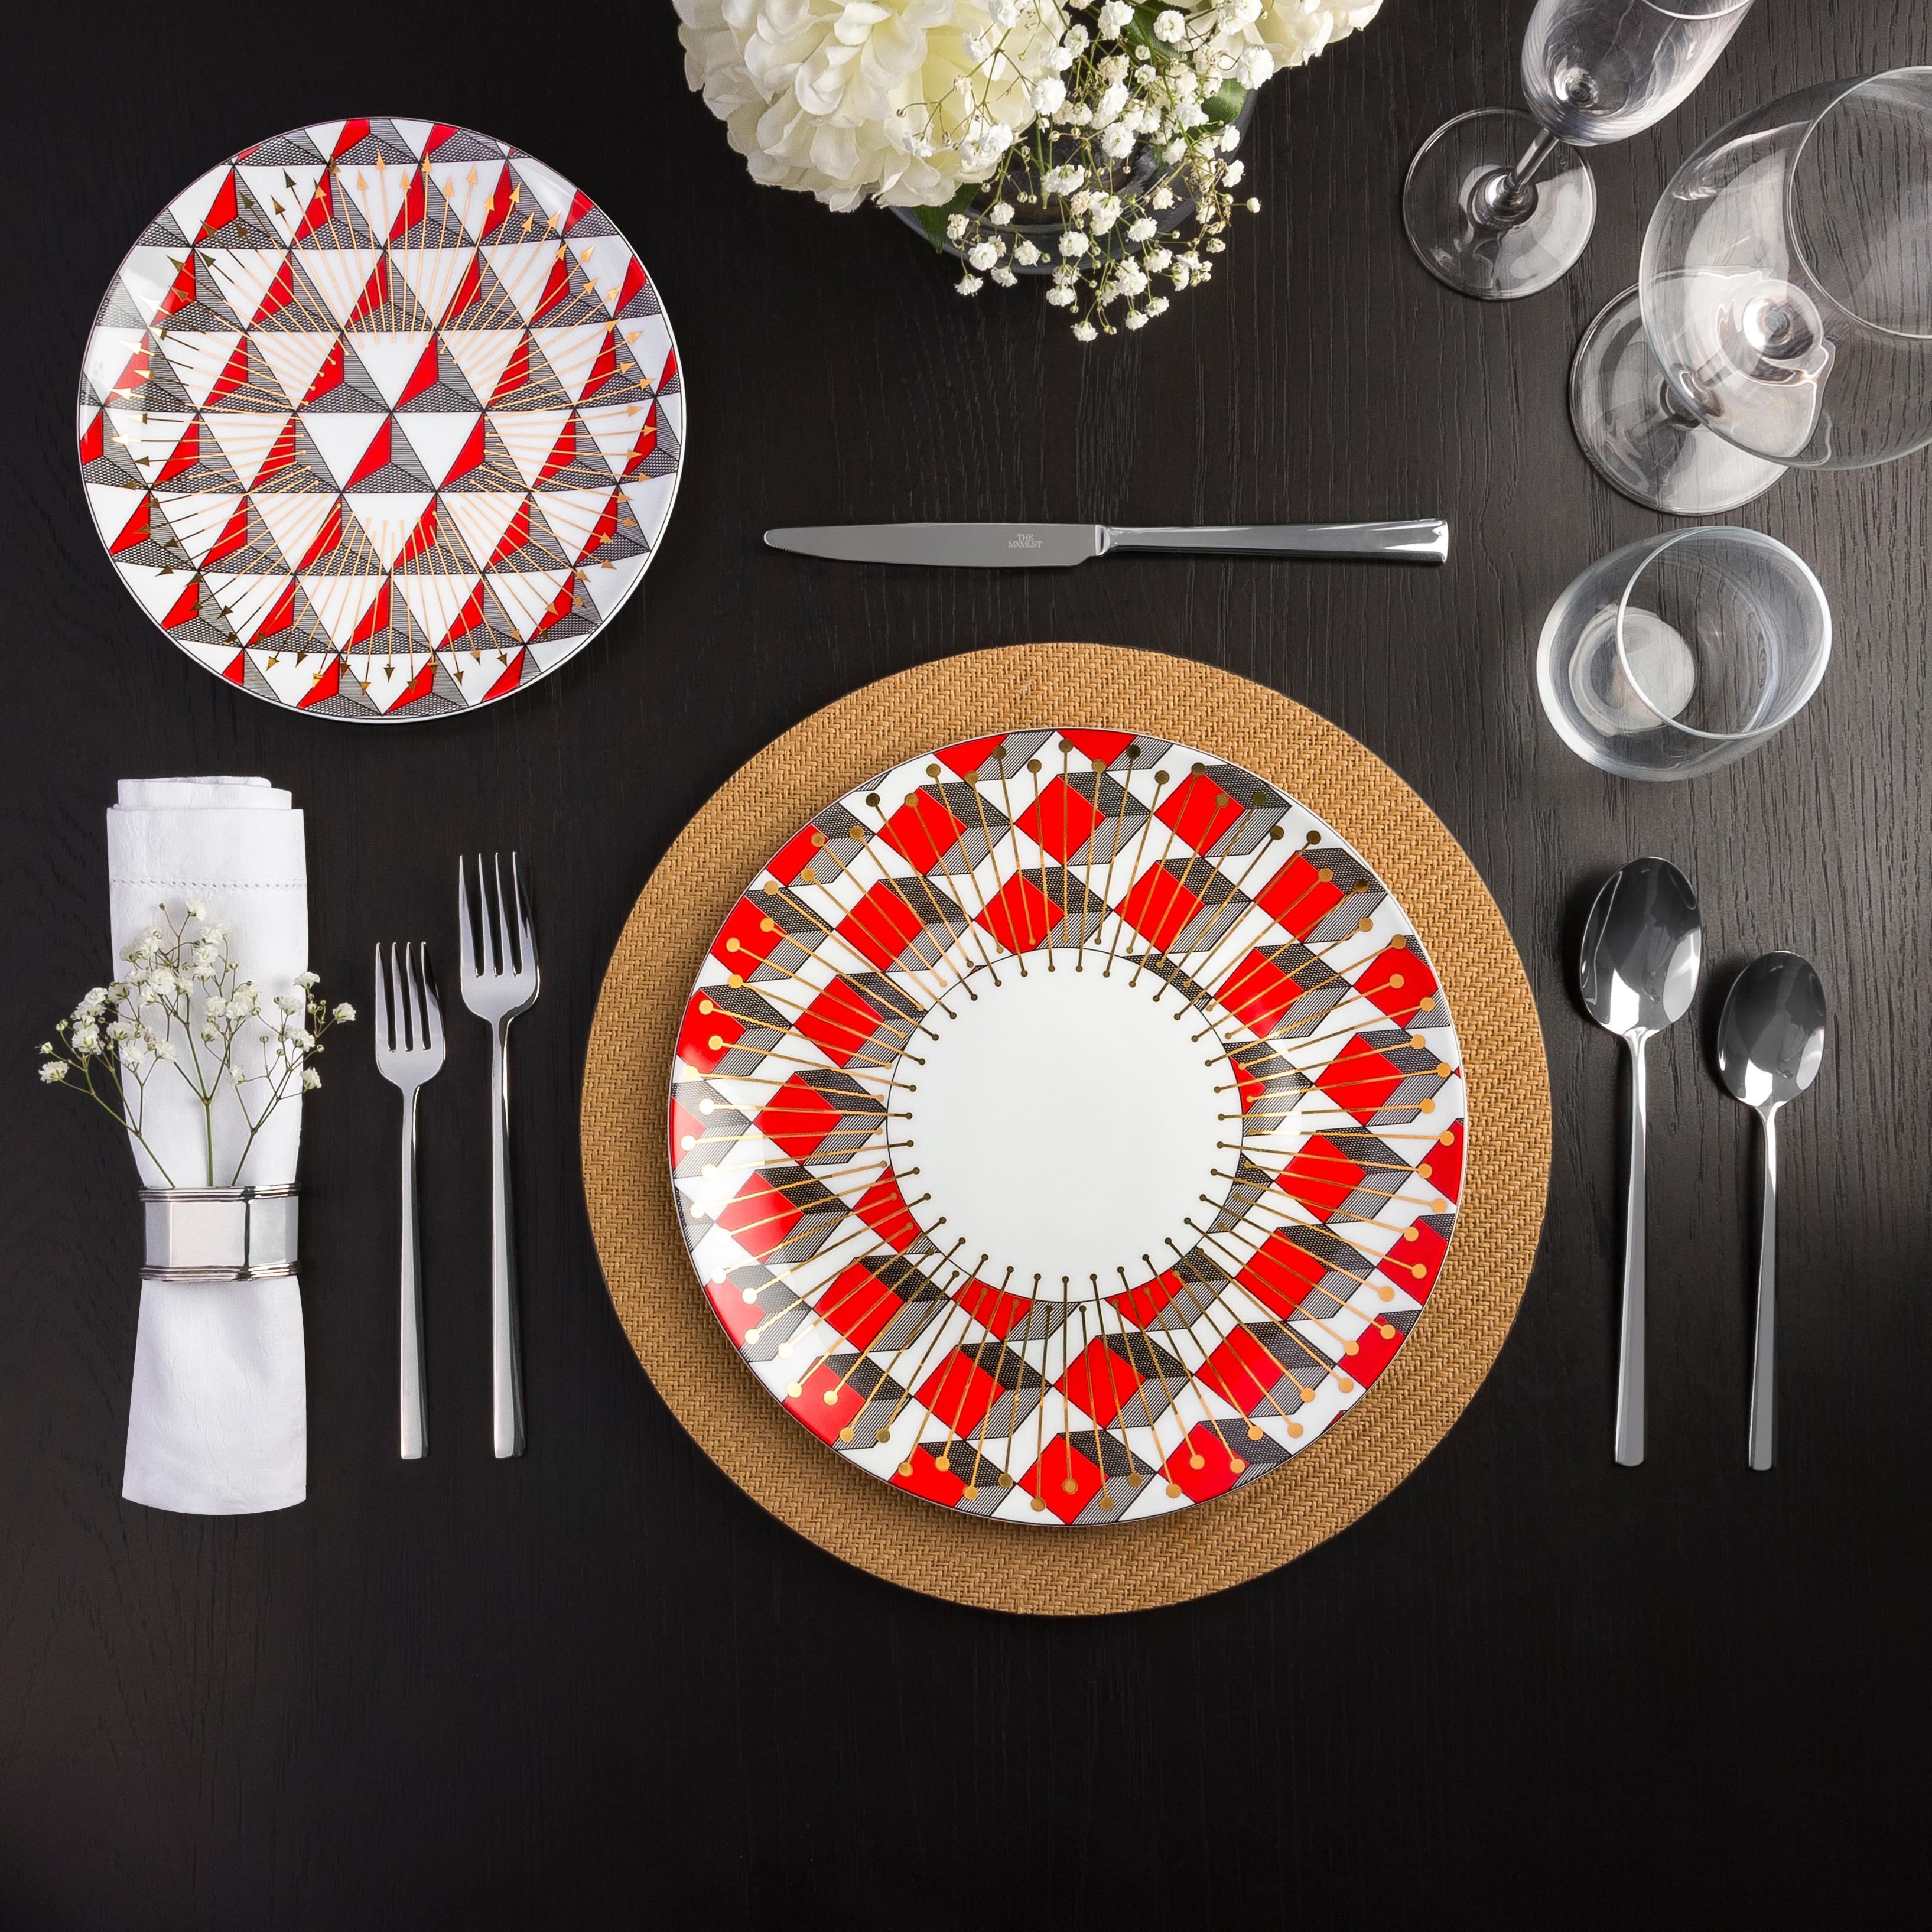 Our most versatile tableware set, Les Noëls Salad Plate features scarlet hexagon patterns accompanied with dynamic lines of gold. This dinner set will liven any formal or casual dining experience. Perfect for the summertime, perfect for the